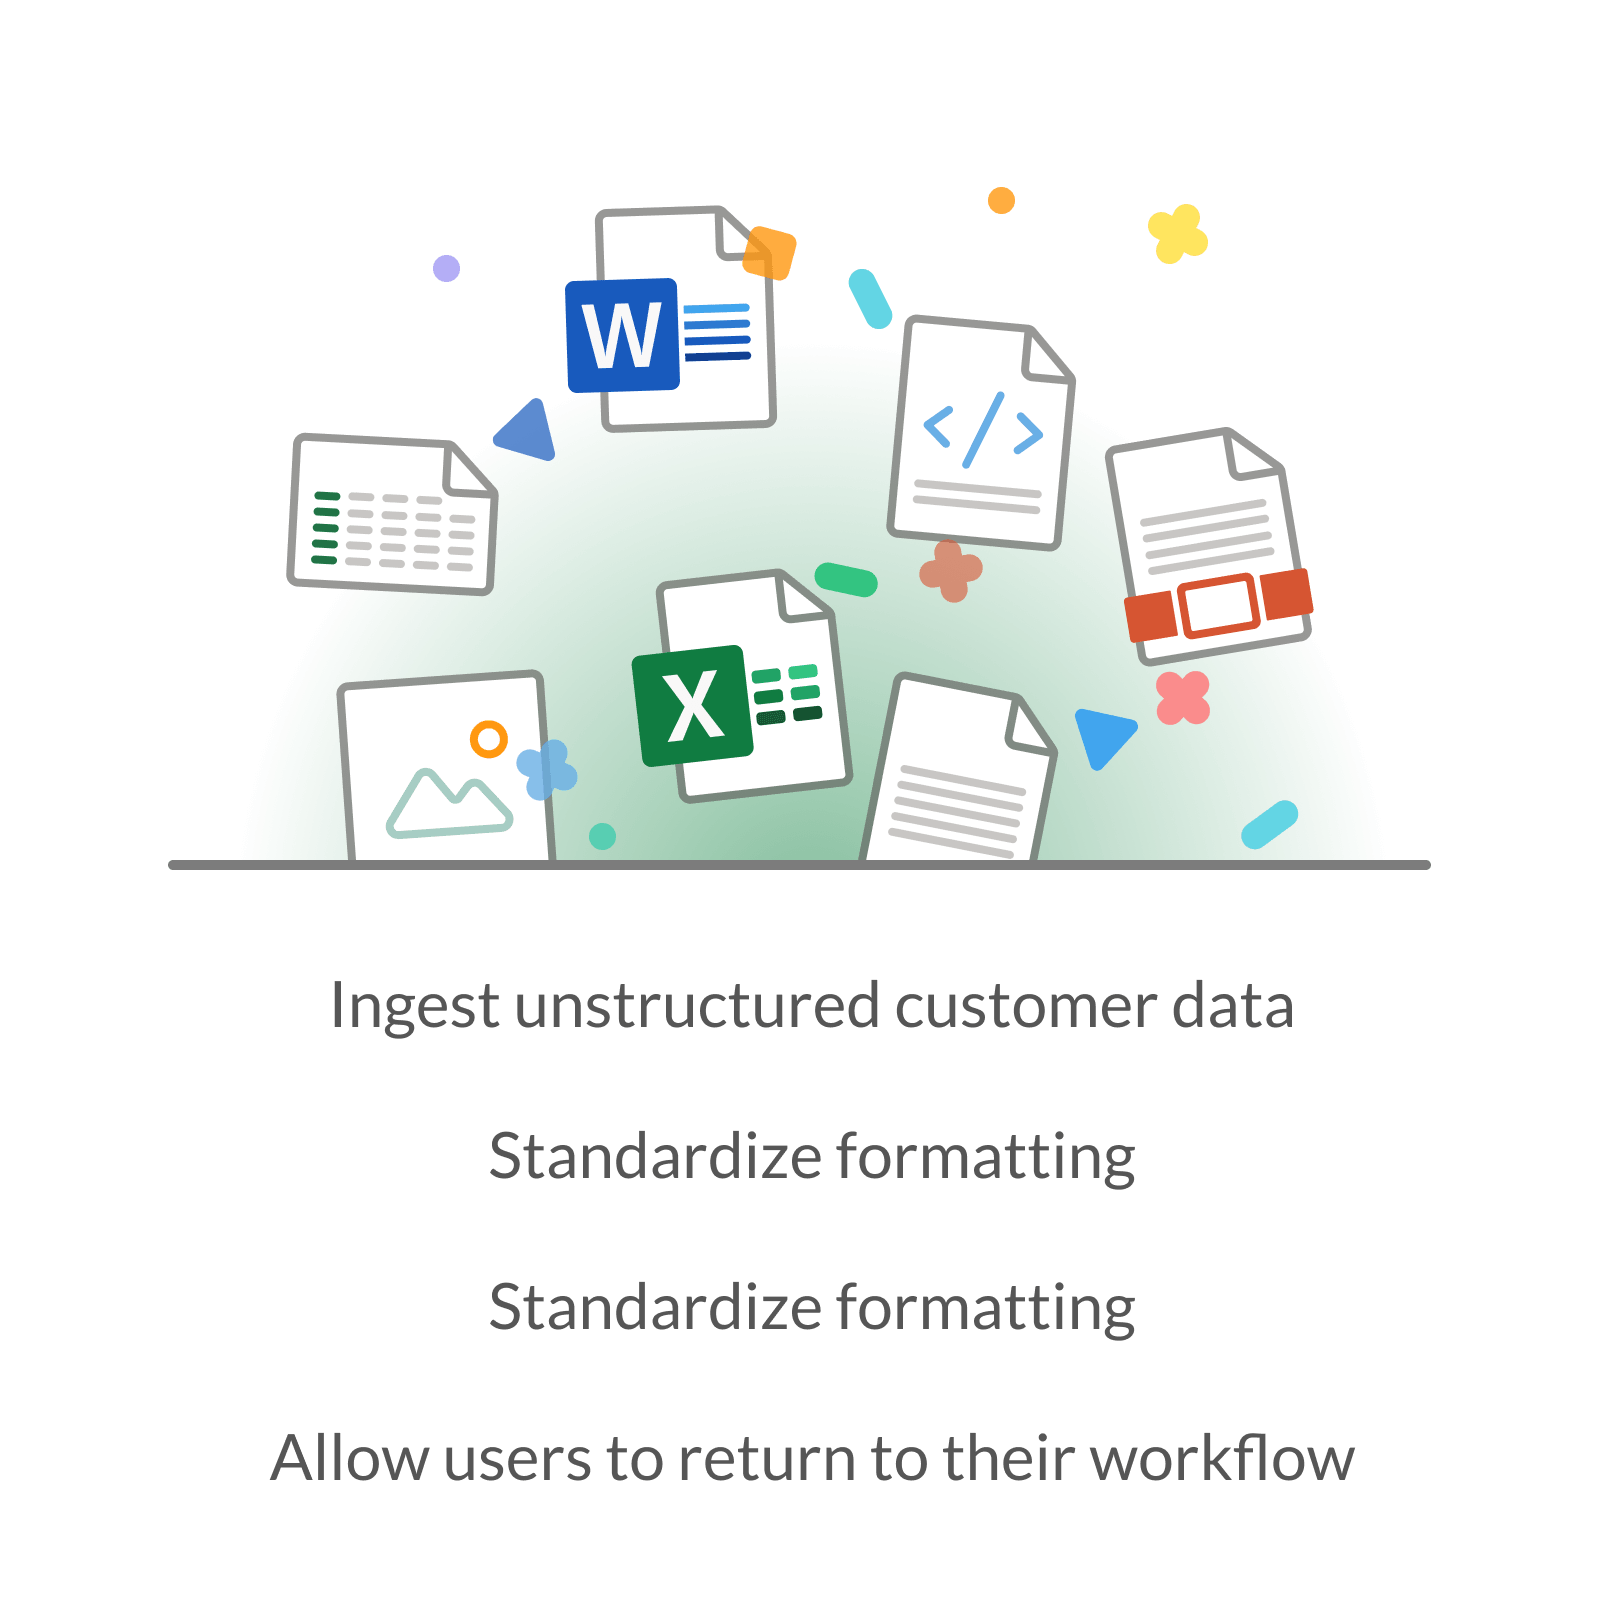 Illustration showing what our product does - data ingestion